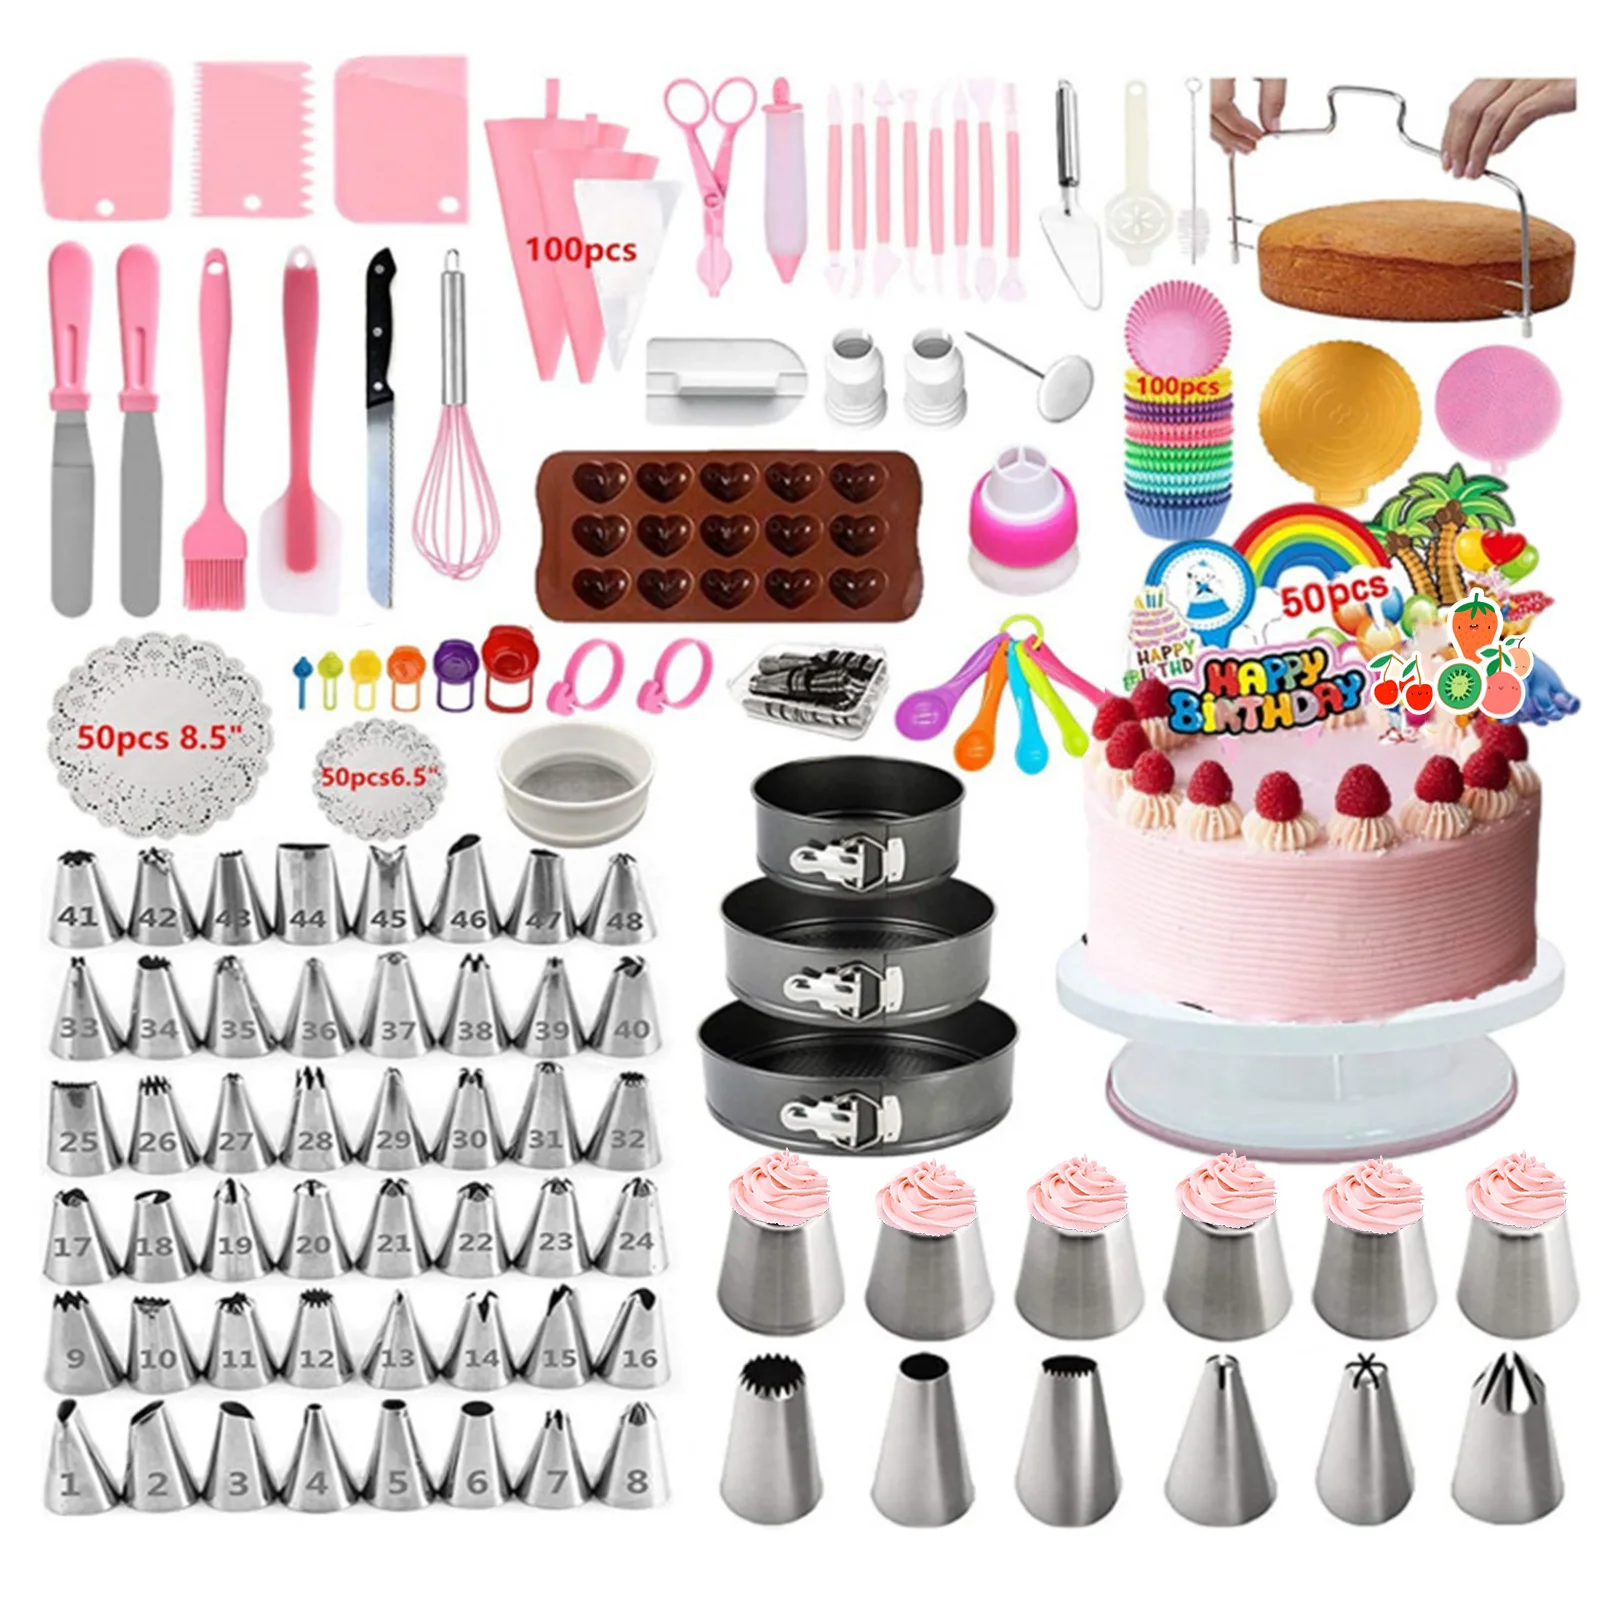 Supplier of all your baking and cake decorating products